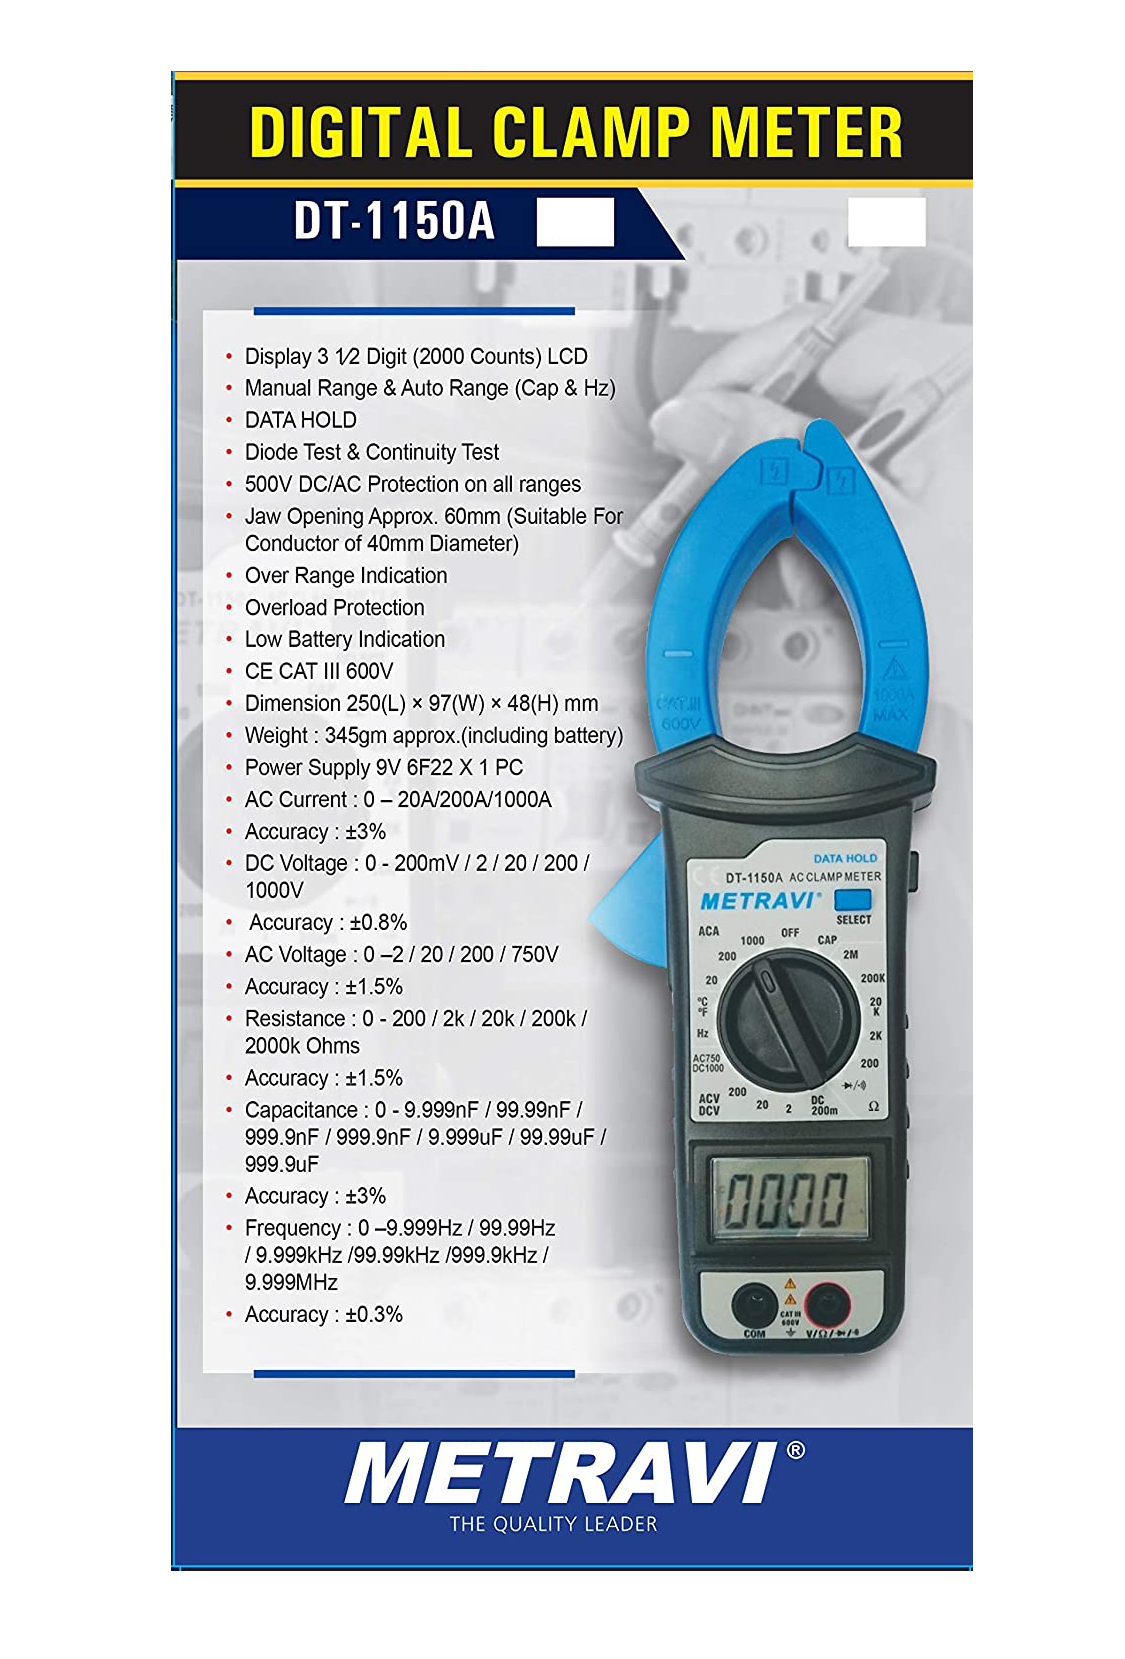 Metravi DT-1150A Digital AC Clamp Meter 1000A, feature-rich with full function overload protection circuit